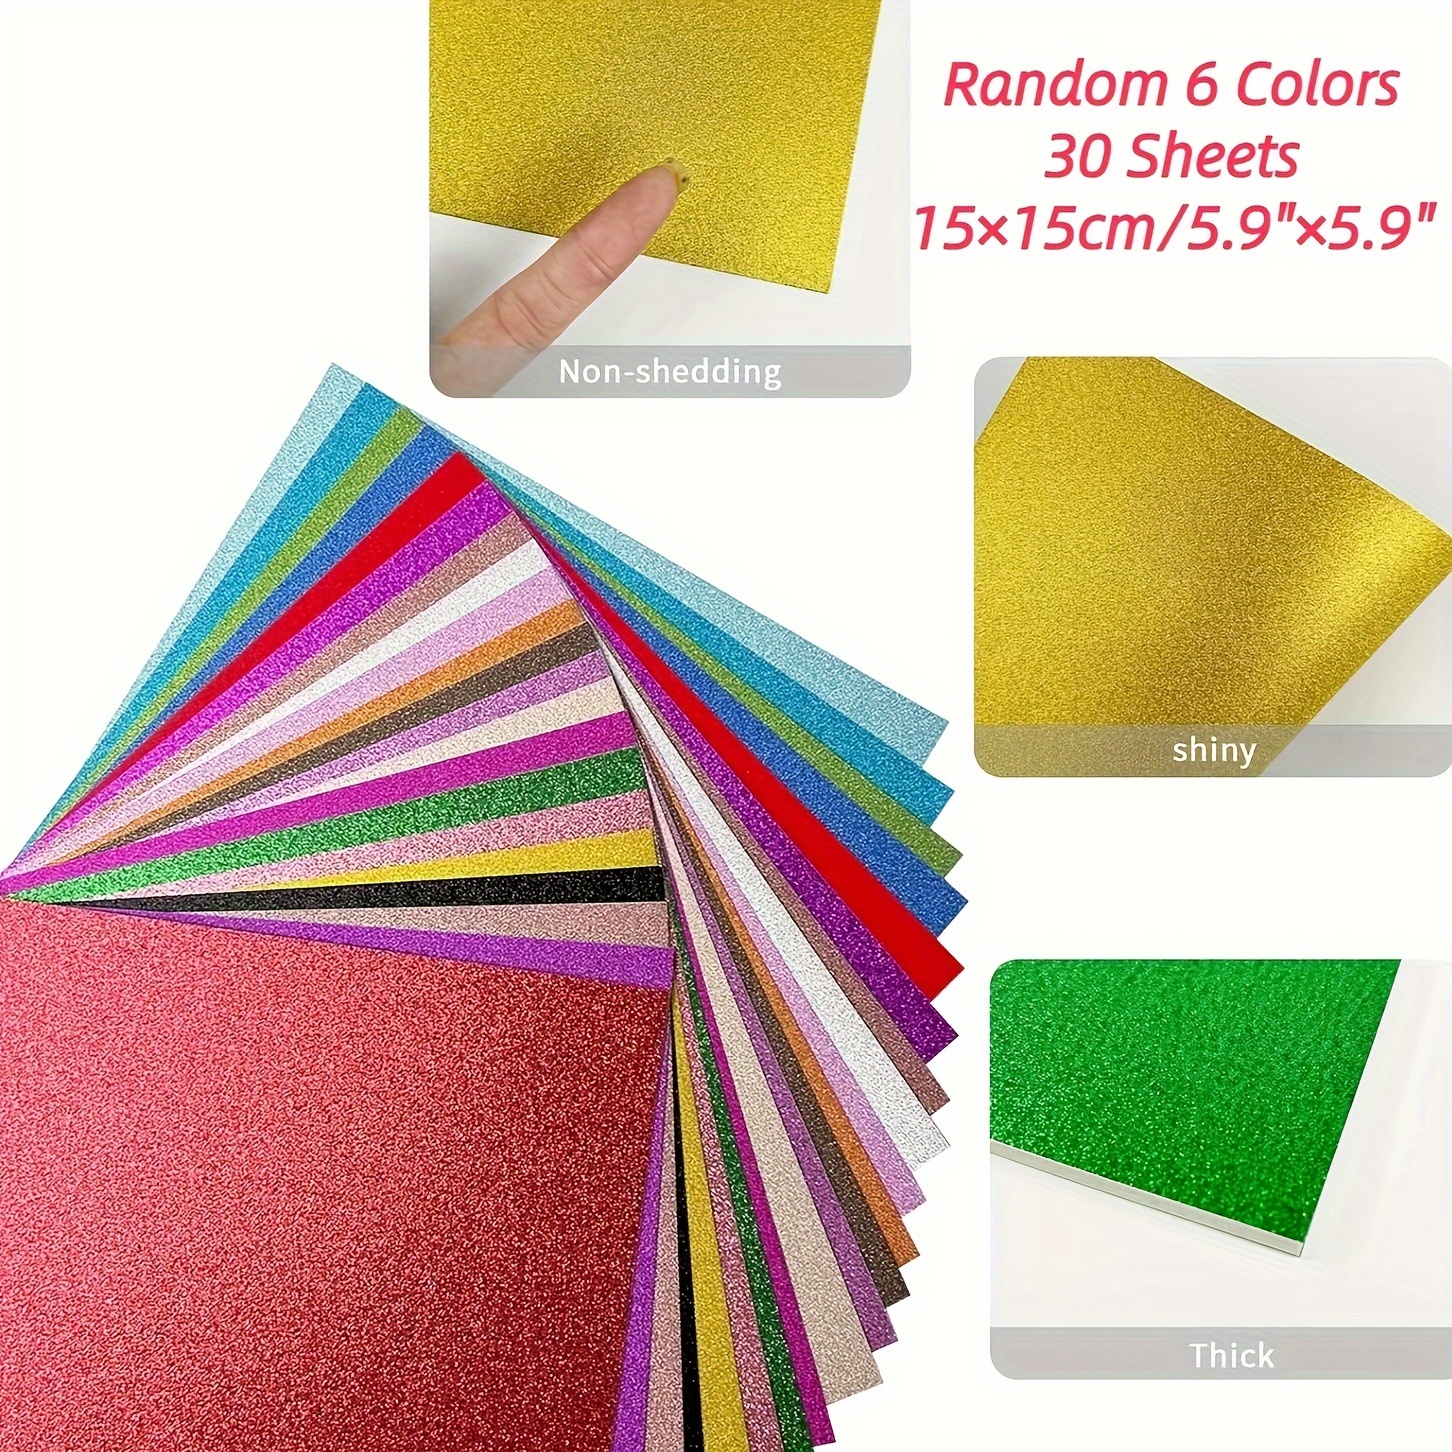 

30pcs Glitter Colored Cardstock, Square 15cm×15cm/5.9"×5.9" Cardstock Sparkly Paper Random 6 Assorted Colors Construction Paper, 250 Gsm Card Stock Scrapbooking Supplies For Diy Crafts Card Making